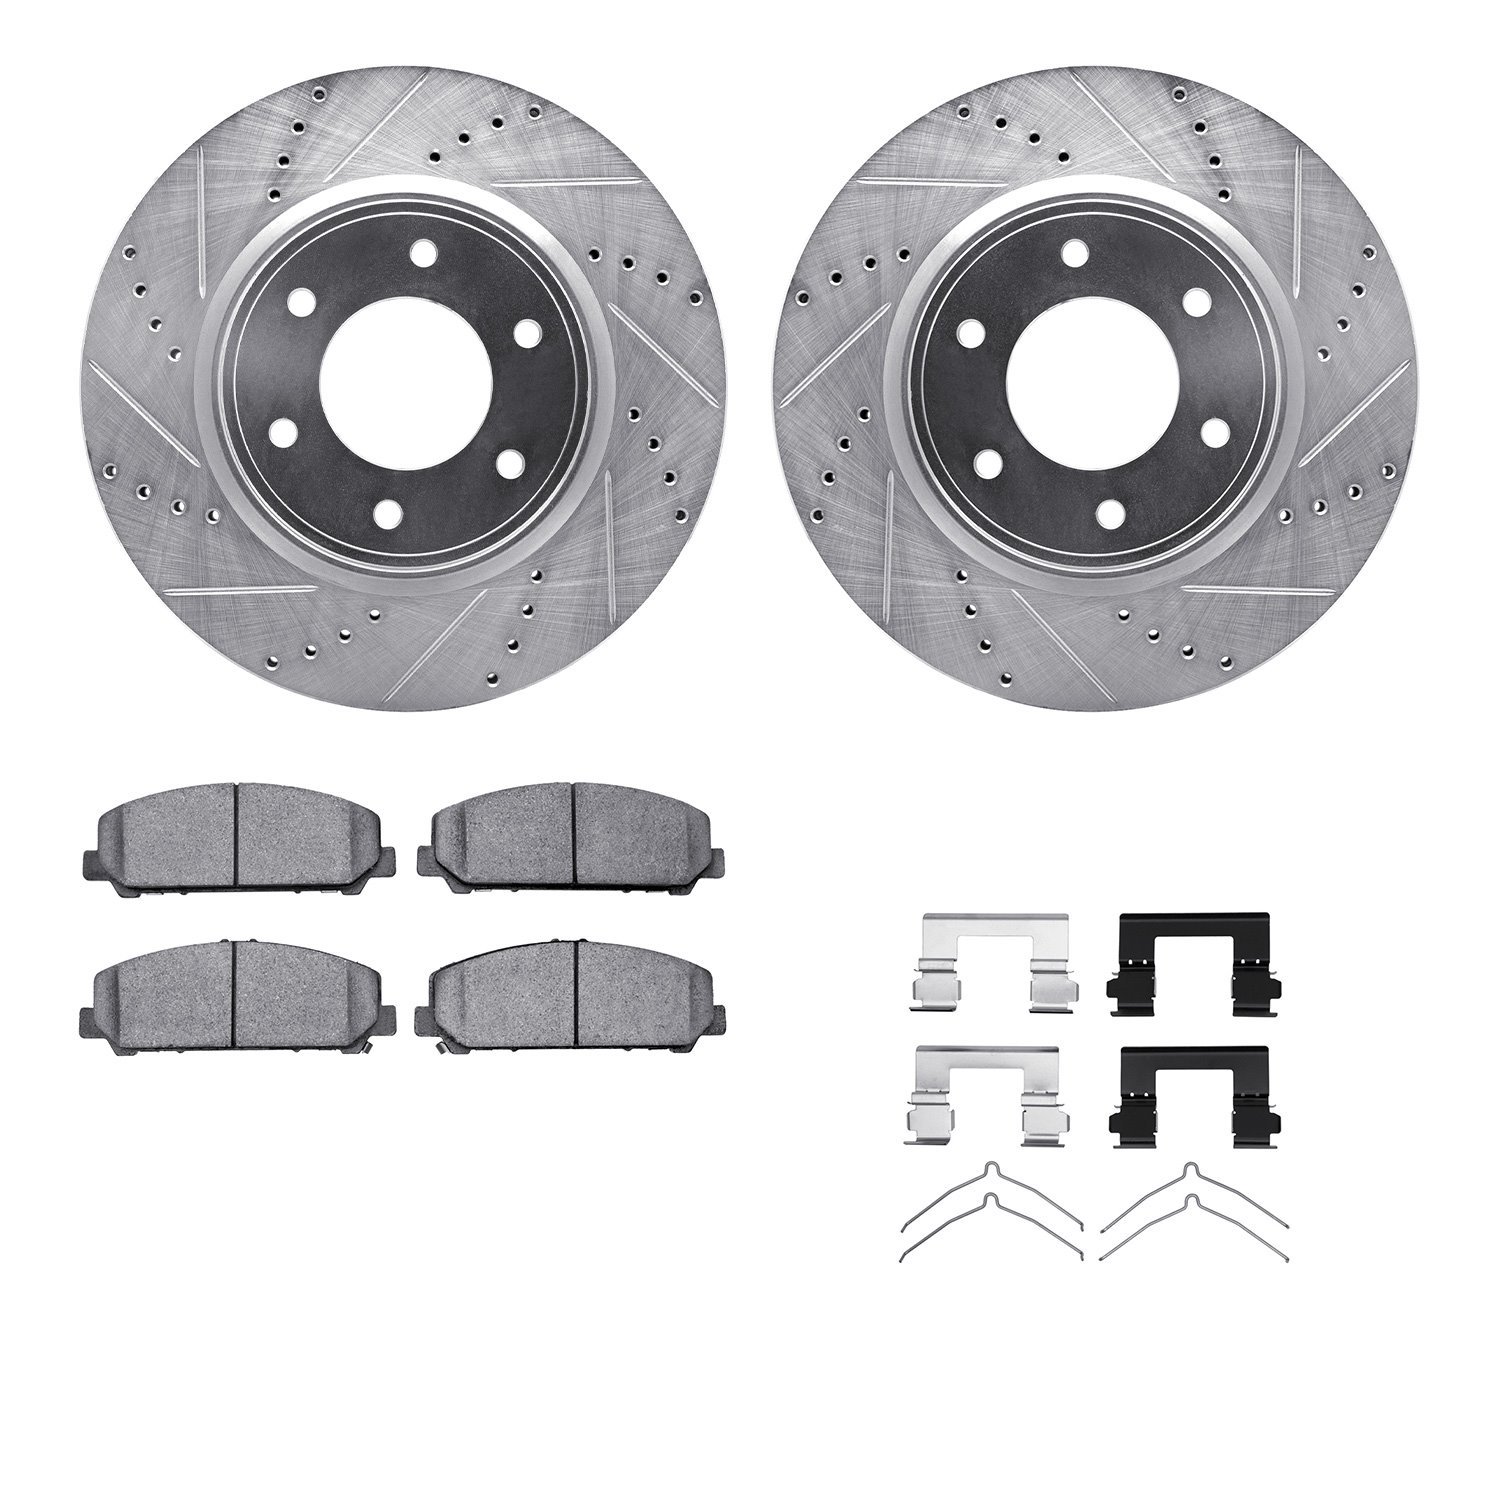 7512-67119 Drilled/Slotted Brake Rotors w/5000 Advanced Brake Pads Kit & Hardware [Silver], Fits Select Infiniti/Nissan, Positio